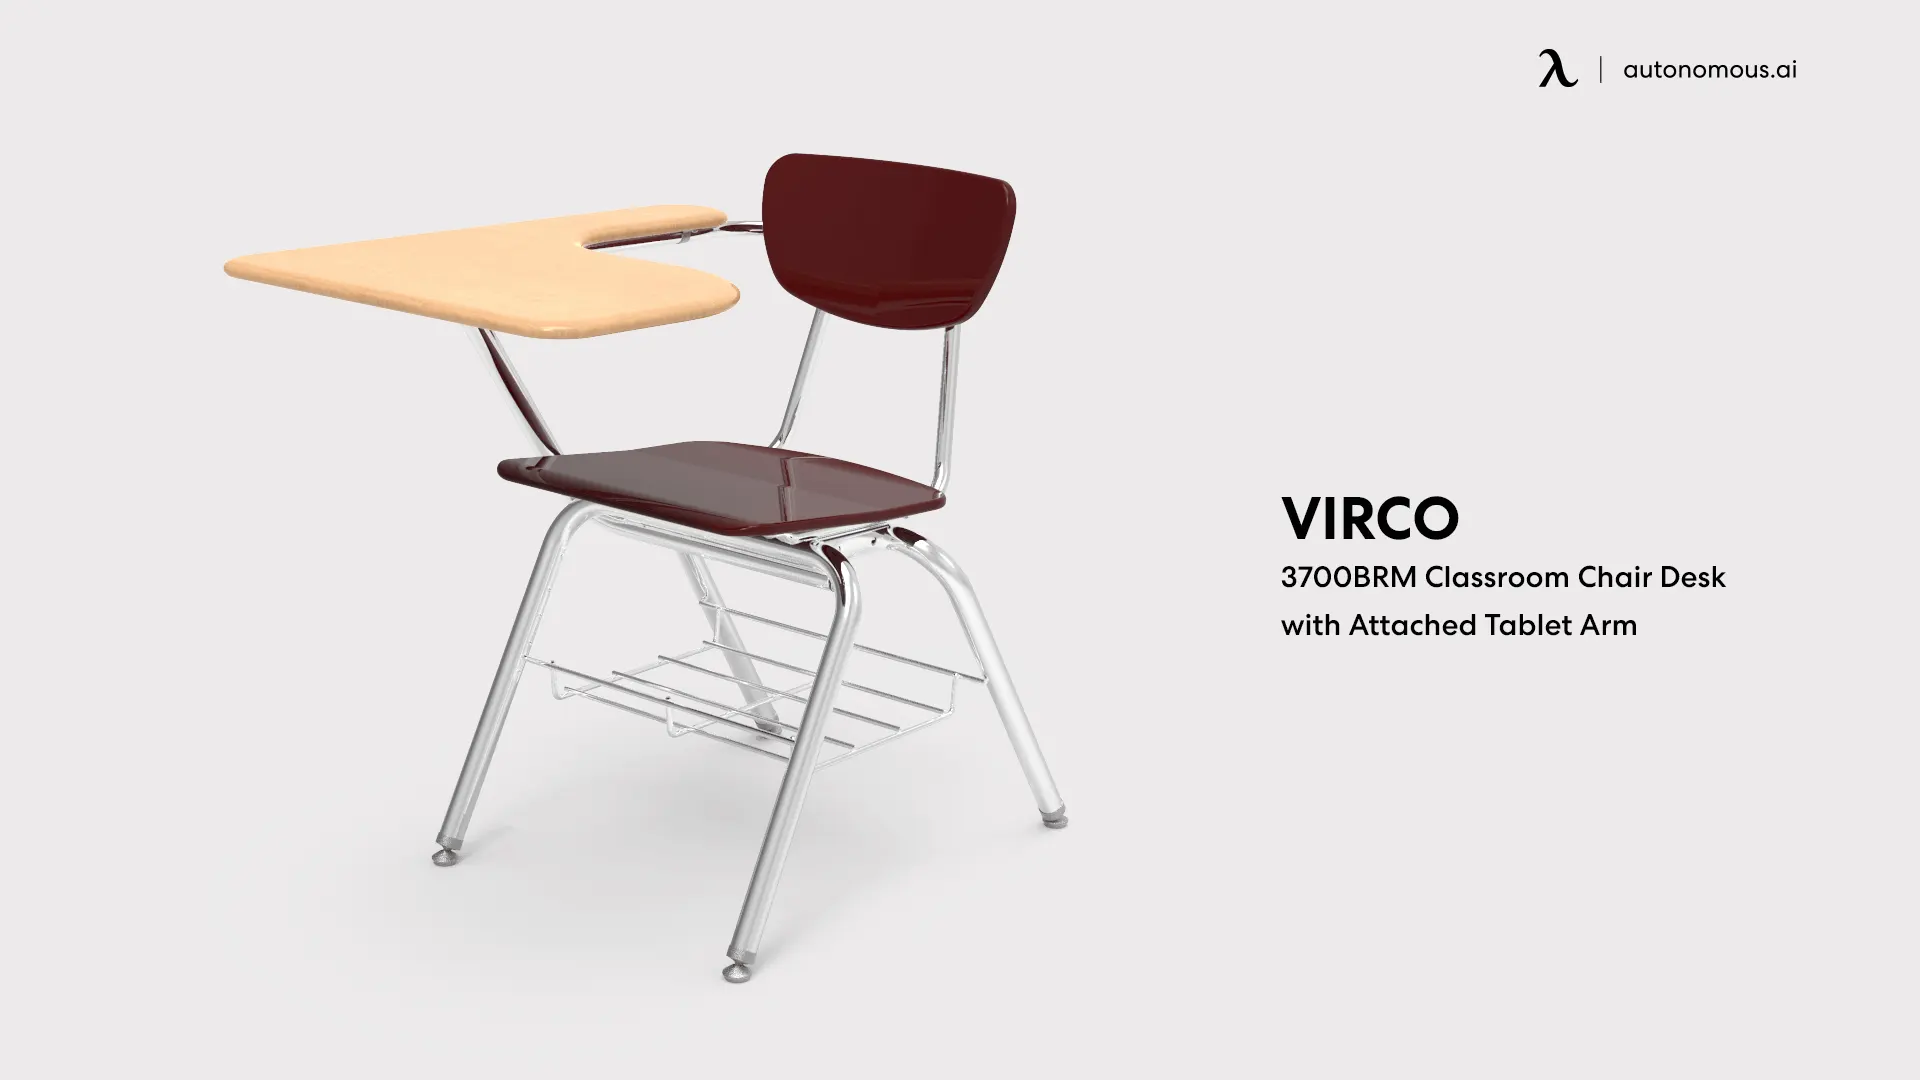 Virco 3700BRM Classroom Chair Desk with Attached Tablet Arm